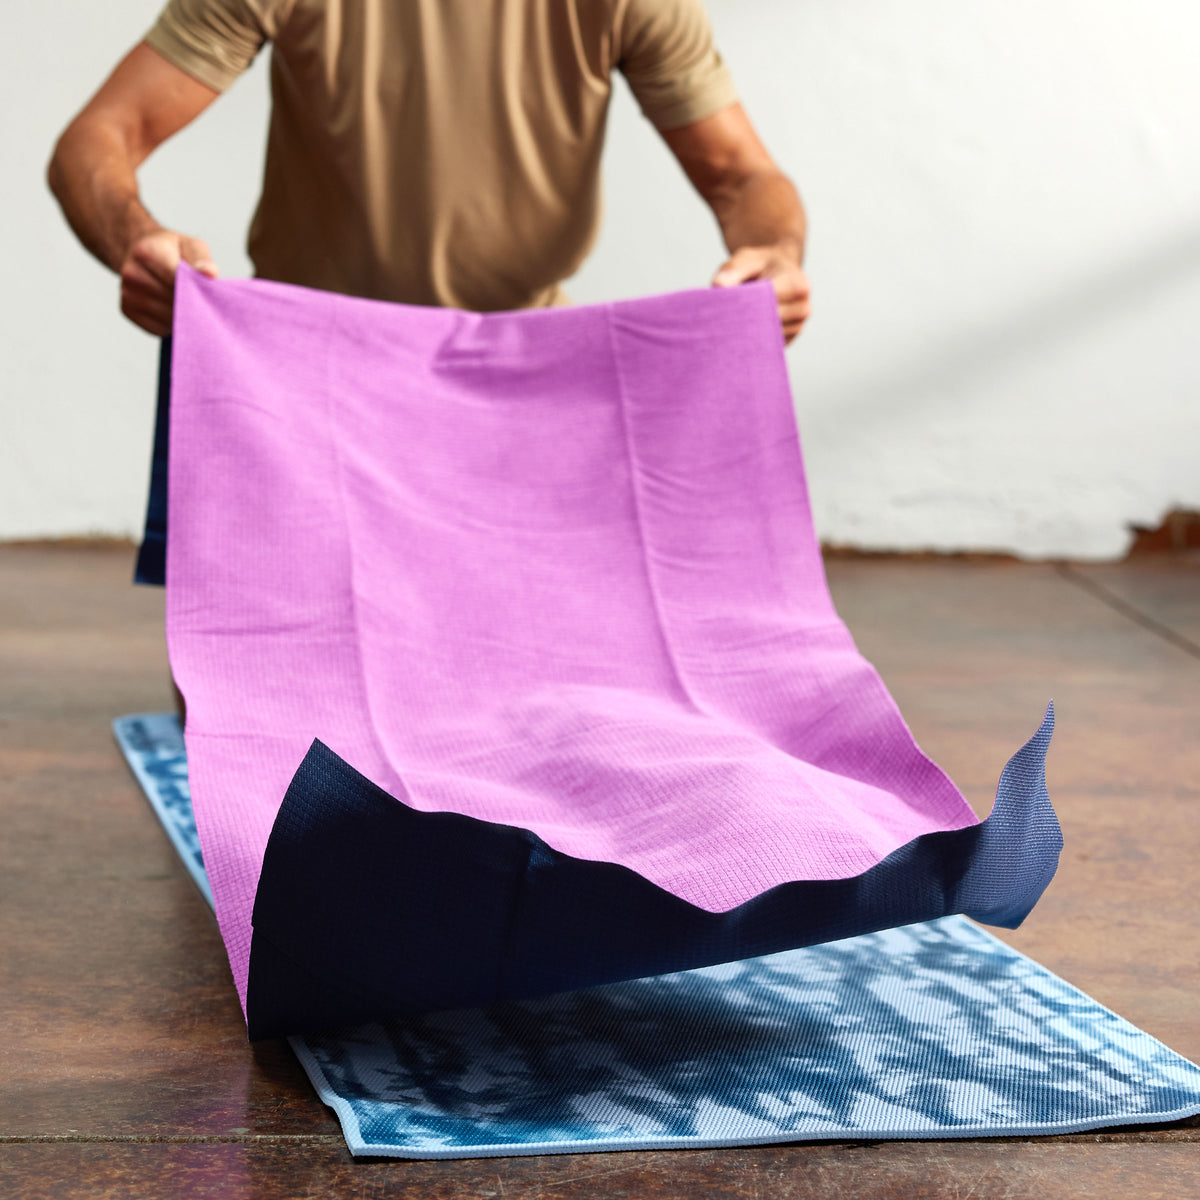 Person shaking out the No-Slip Towel on top of yoga mat